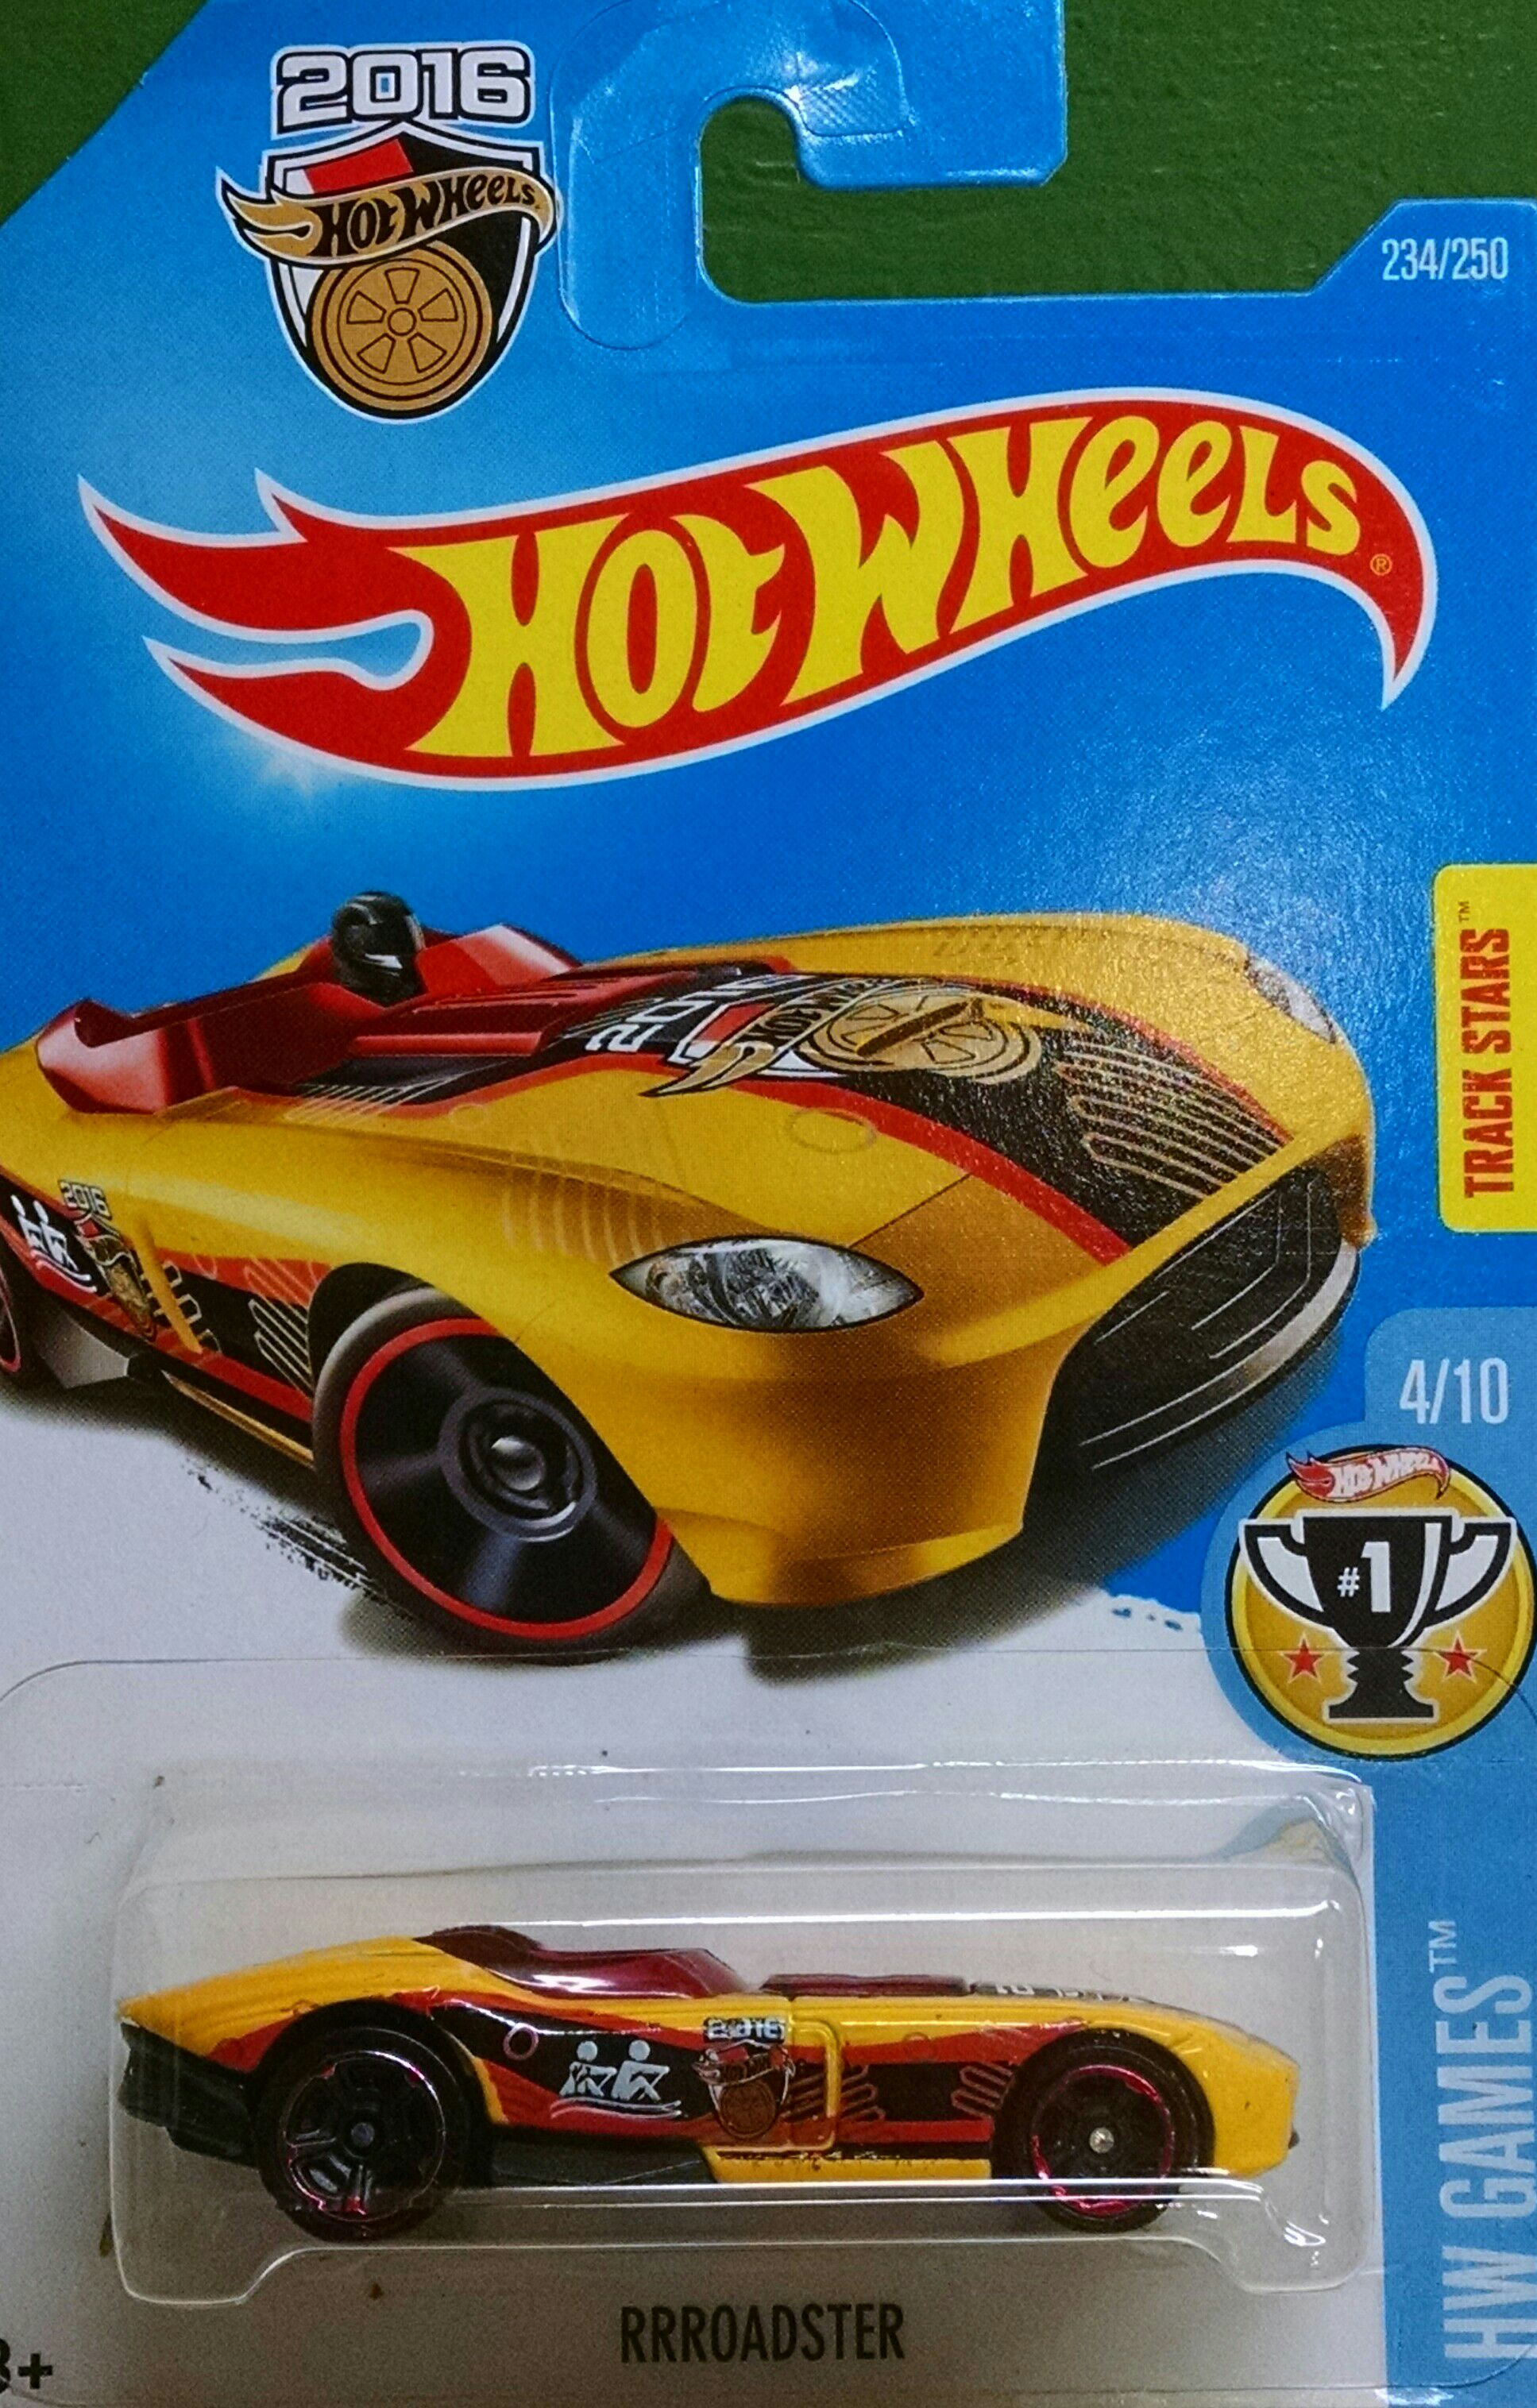 Rrroadster - ’16 HW Games toy car collectible - Main Image 1